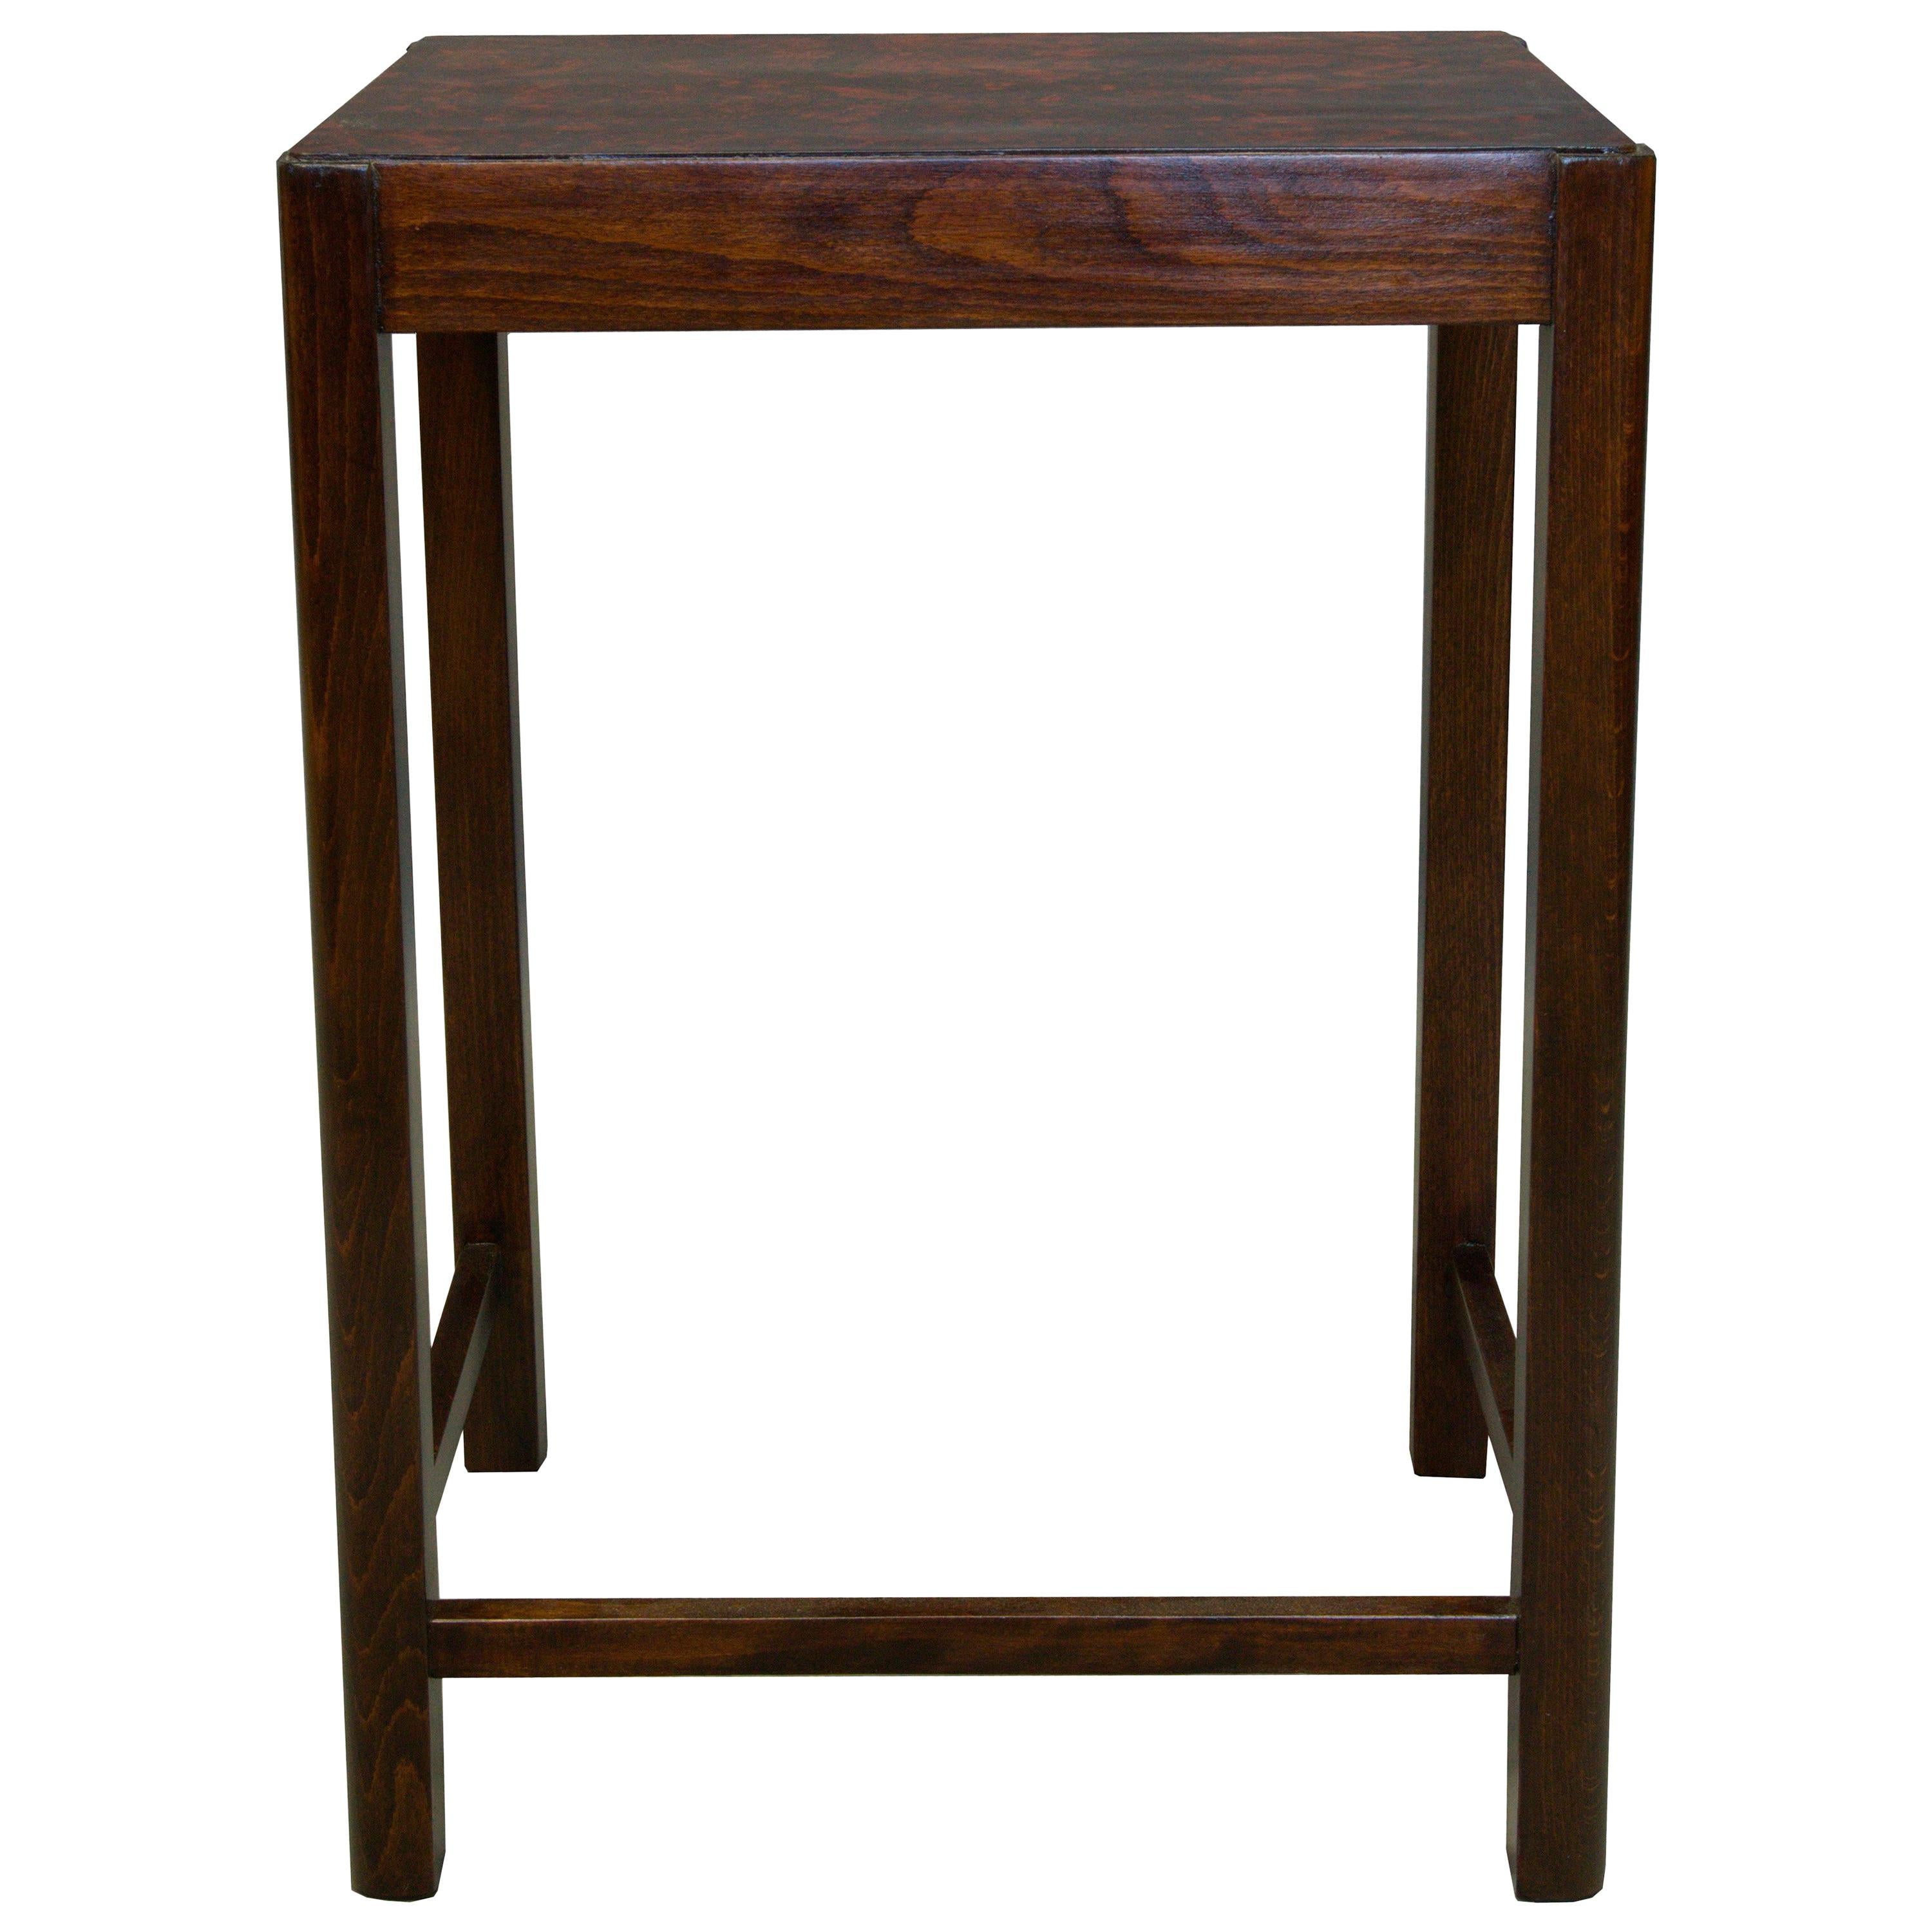 1930s Wooden Side Table with Fake Ivory Worktop by Thonet im Angebot